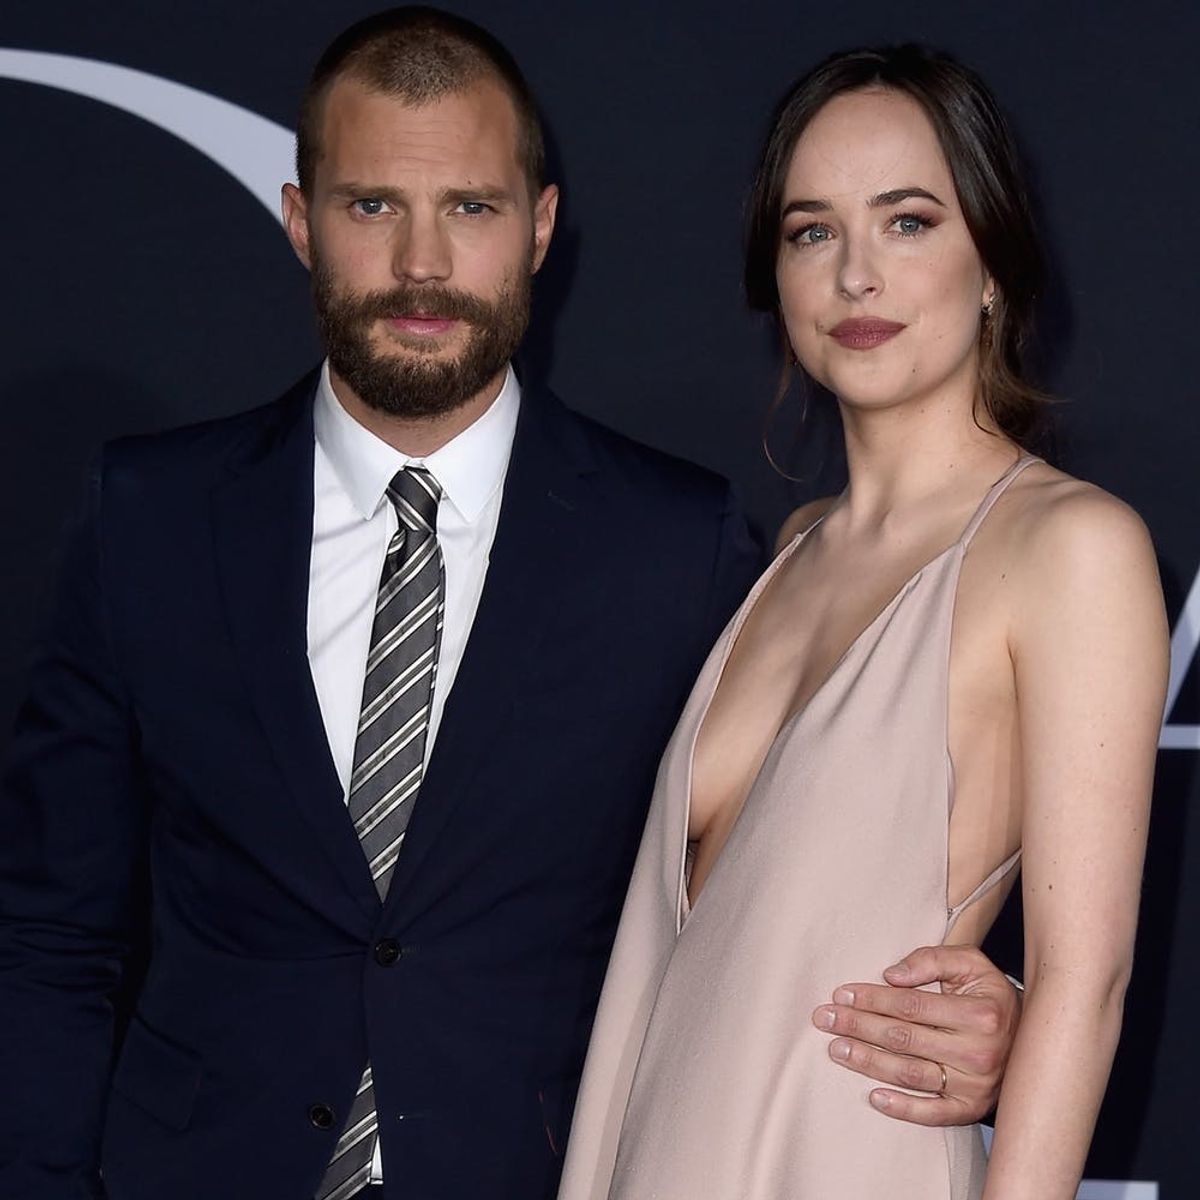 Dakota Johnson and Jamie Dornan Just Spilled Their Valentine’s Day Plans and They’re Not at All What You’d Expect